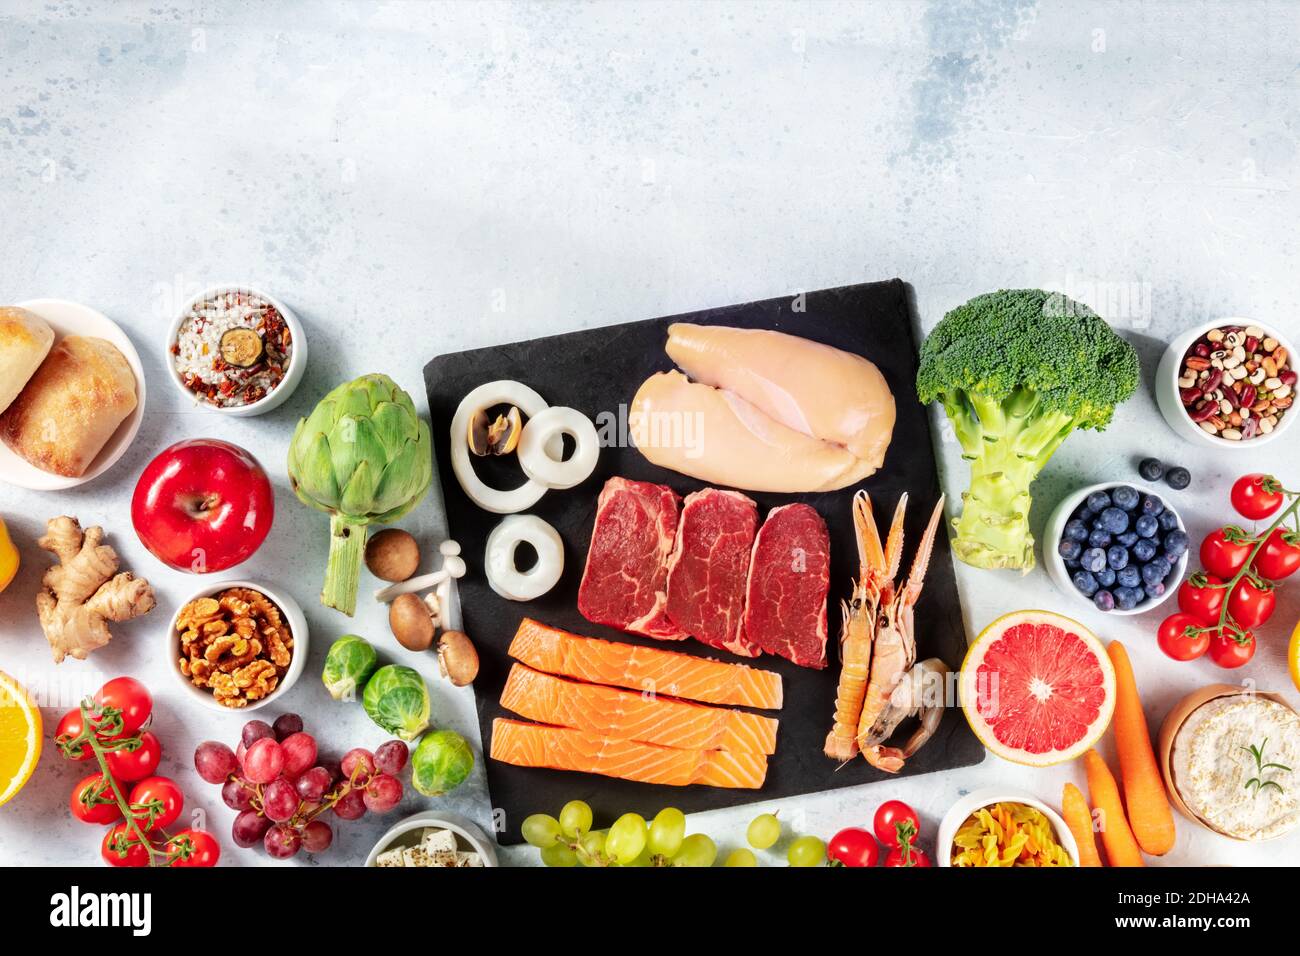 Food. Main proteins, fruit and vegetables, cheeese, nuts, rice, pasta, bread, shot from the top with a place for text Stock Photo